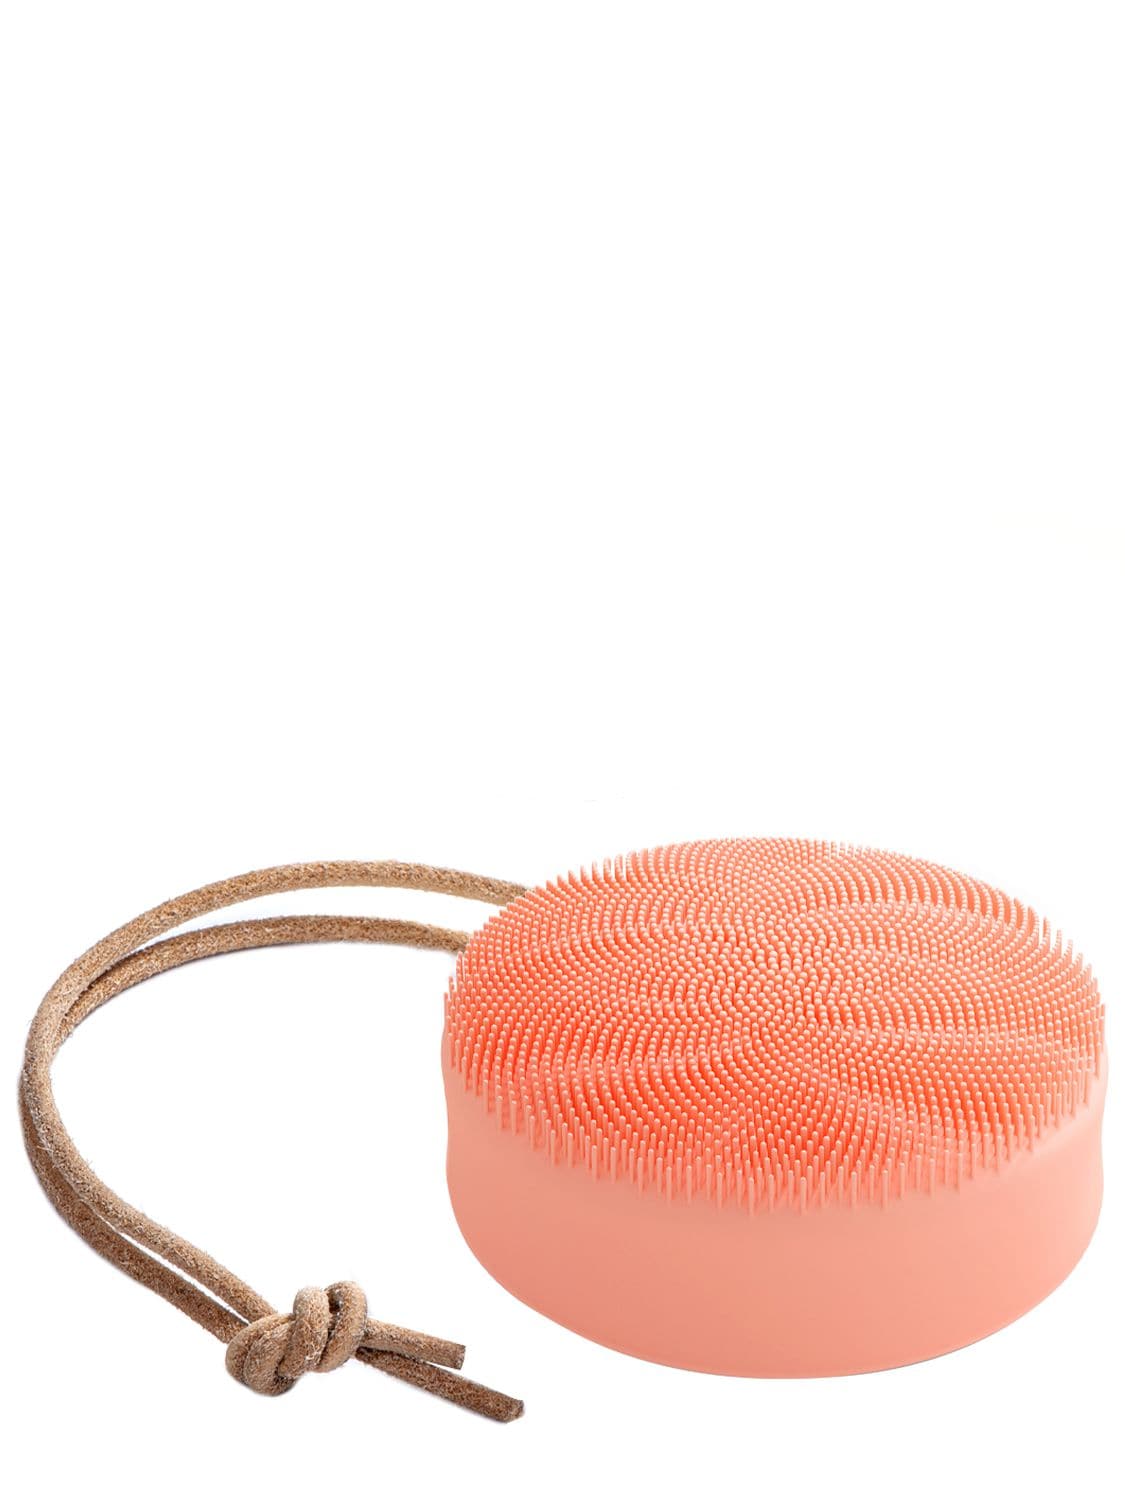 Image of Luna 4 Body Cleansing Device